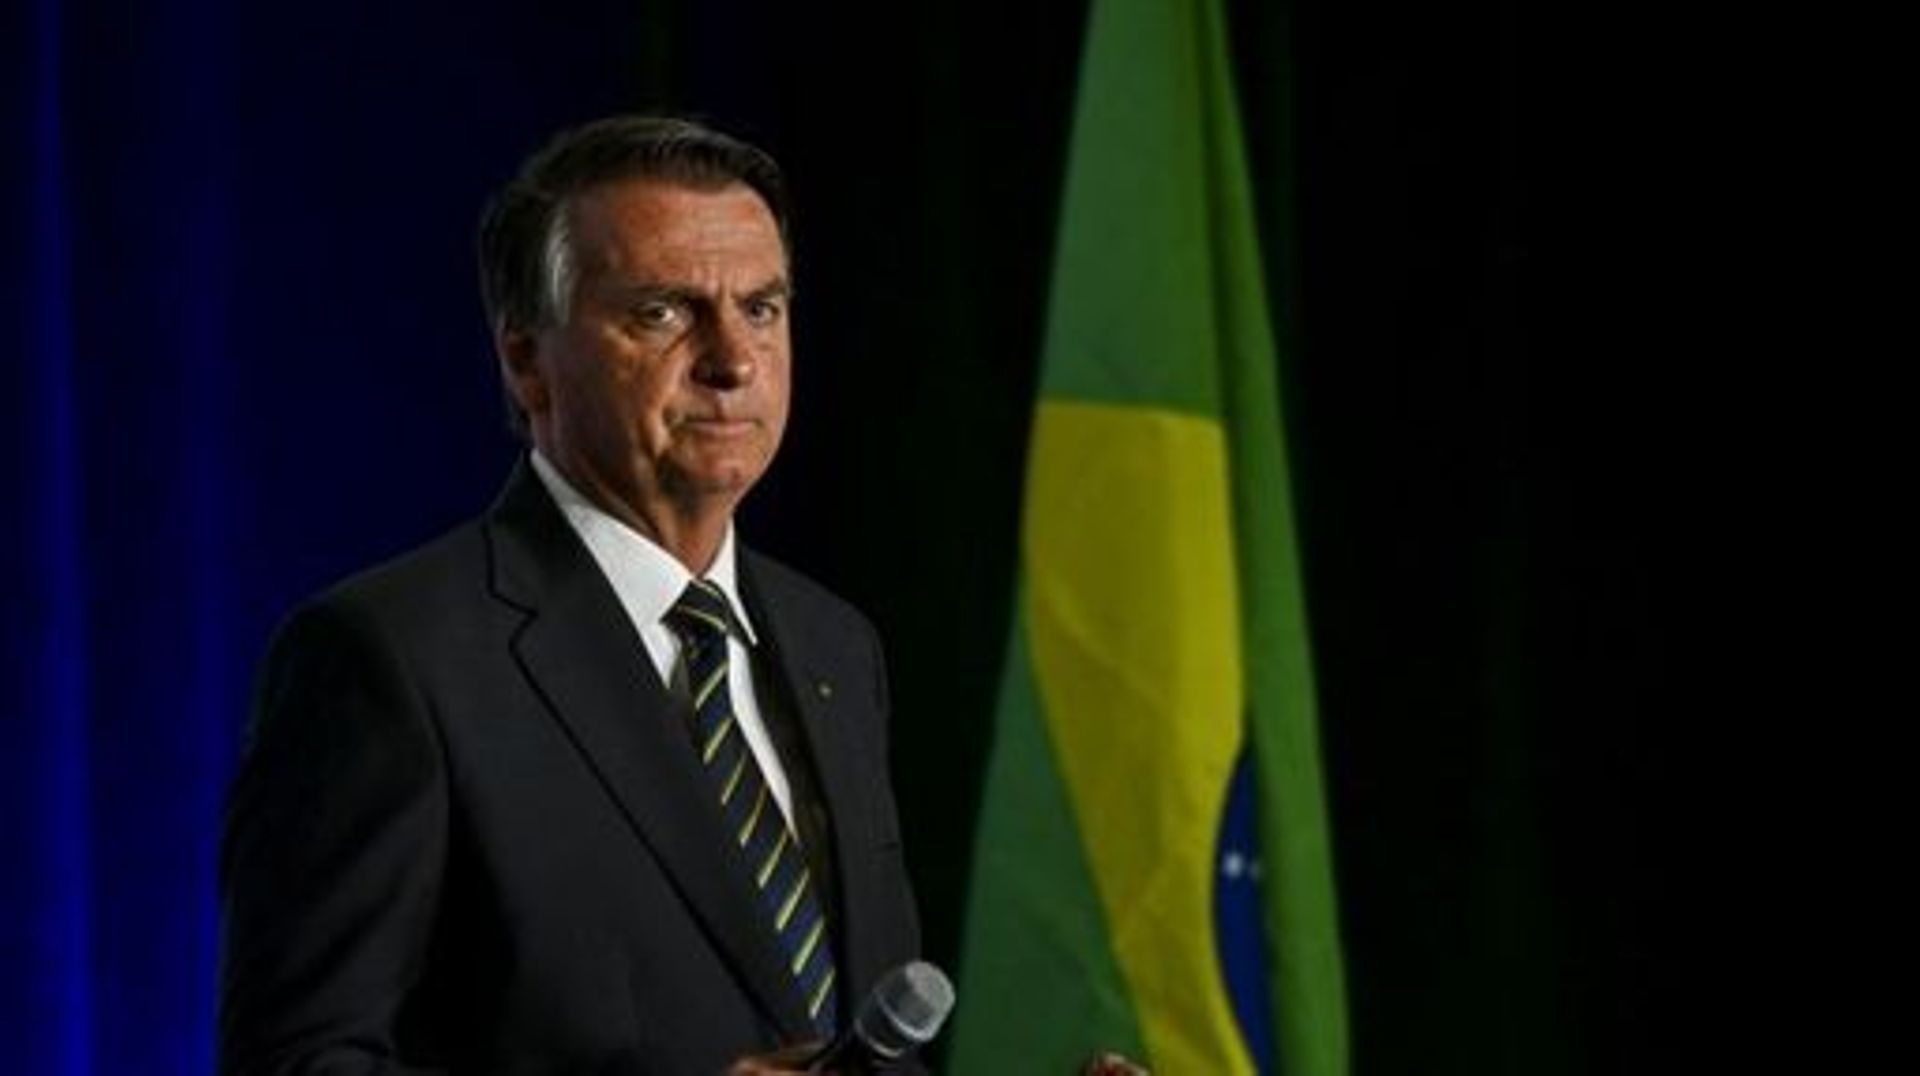 Former Brazilian President Jair Bolsonaro speaks during a "Power of the People Rally" at Trump National Doral resort in Miami, Florida, on February 3, 2023. CHANDAN KHANNA / AFP